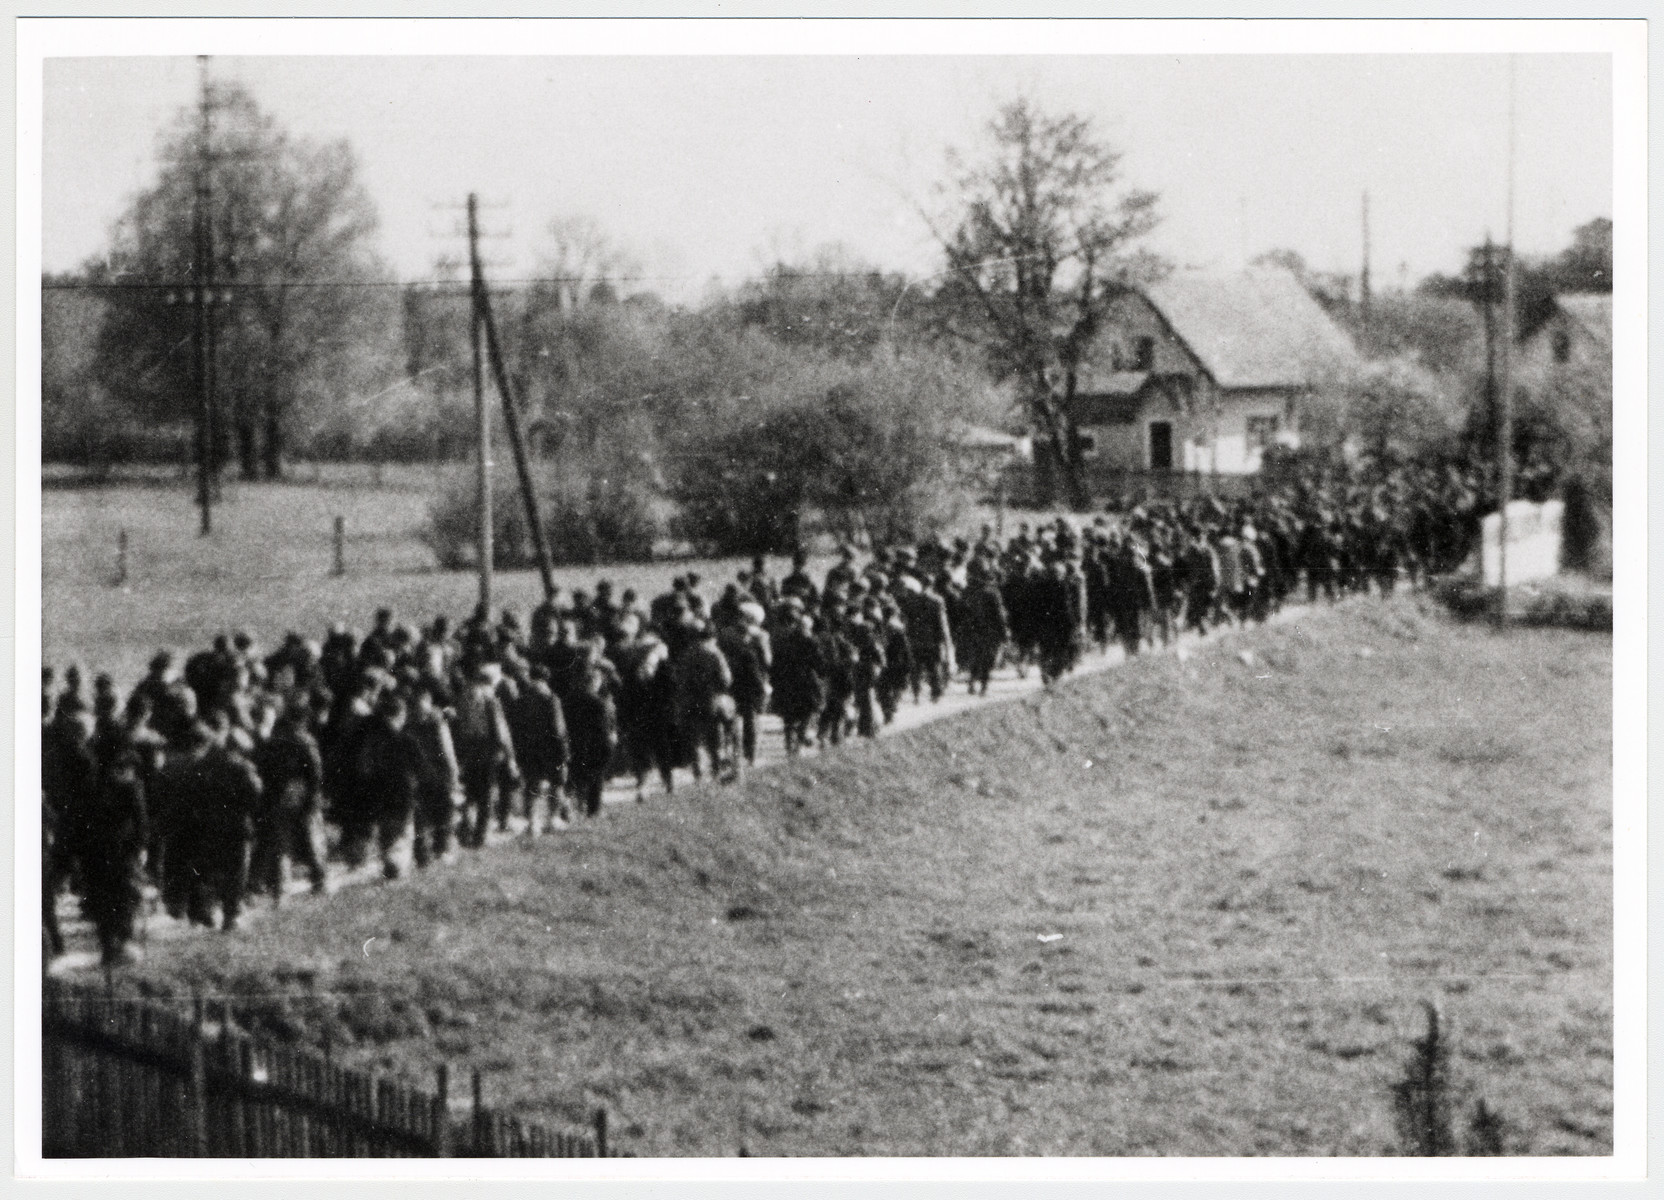 Clandestine photograph of prisoners marching to Dachau.

Maria Seidenberger took the photo from the second story window of her family's home while her mother stood outside and gave potatoes to the prisoners.